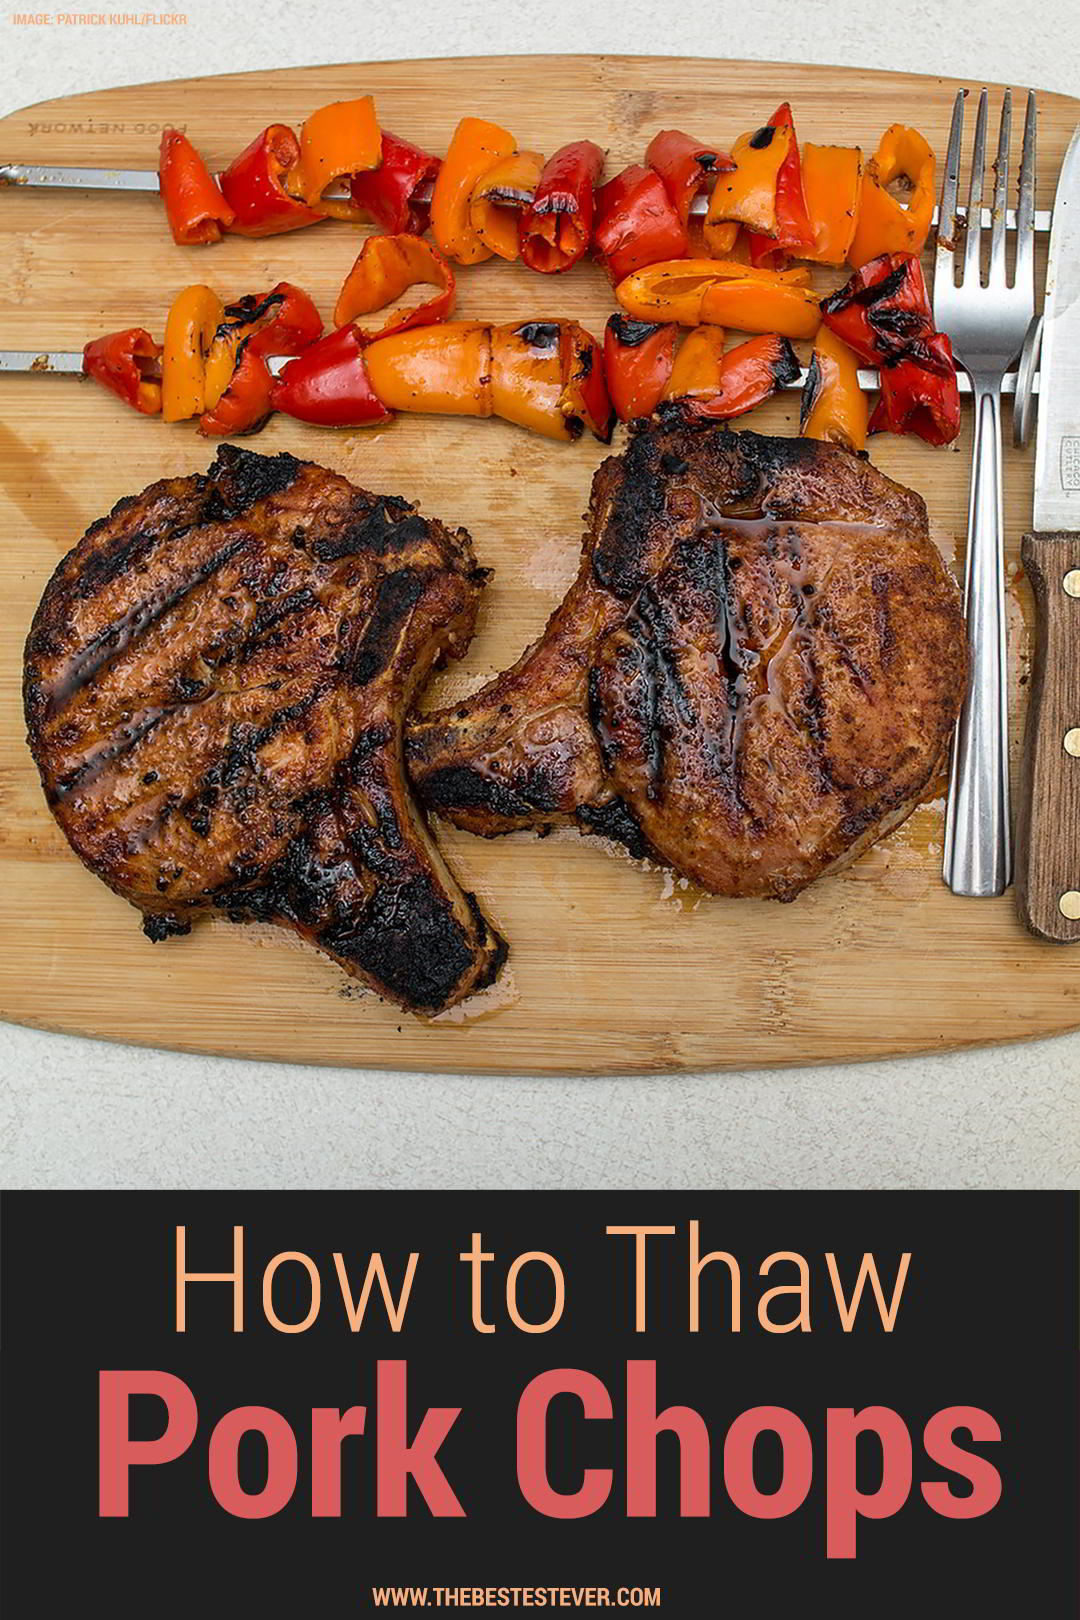 How to Thaw Pork Chops: Step-by-Step Guide